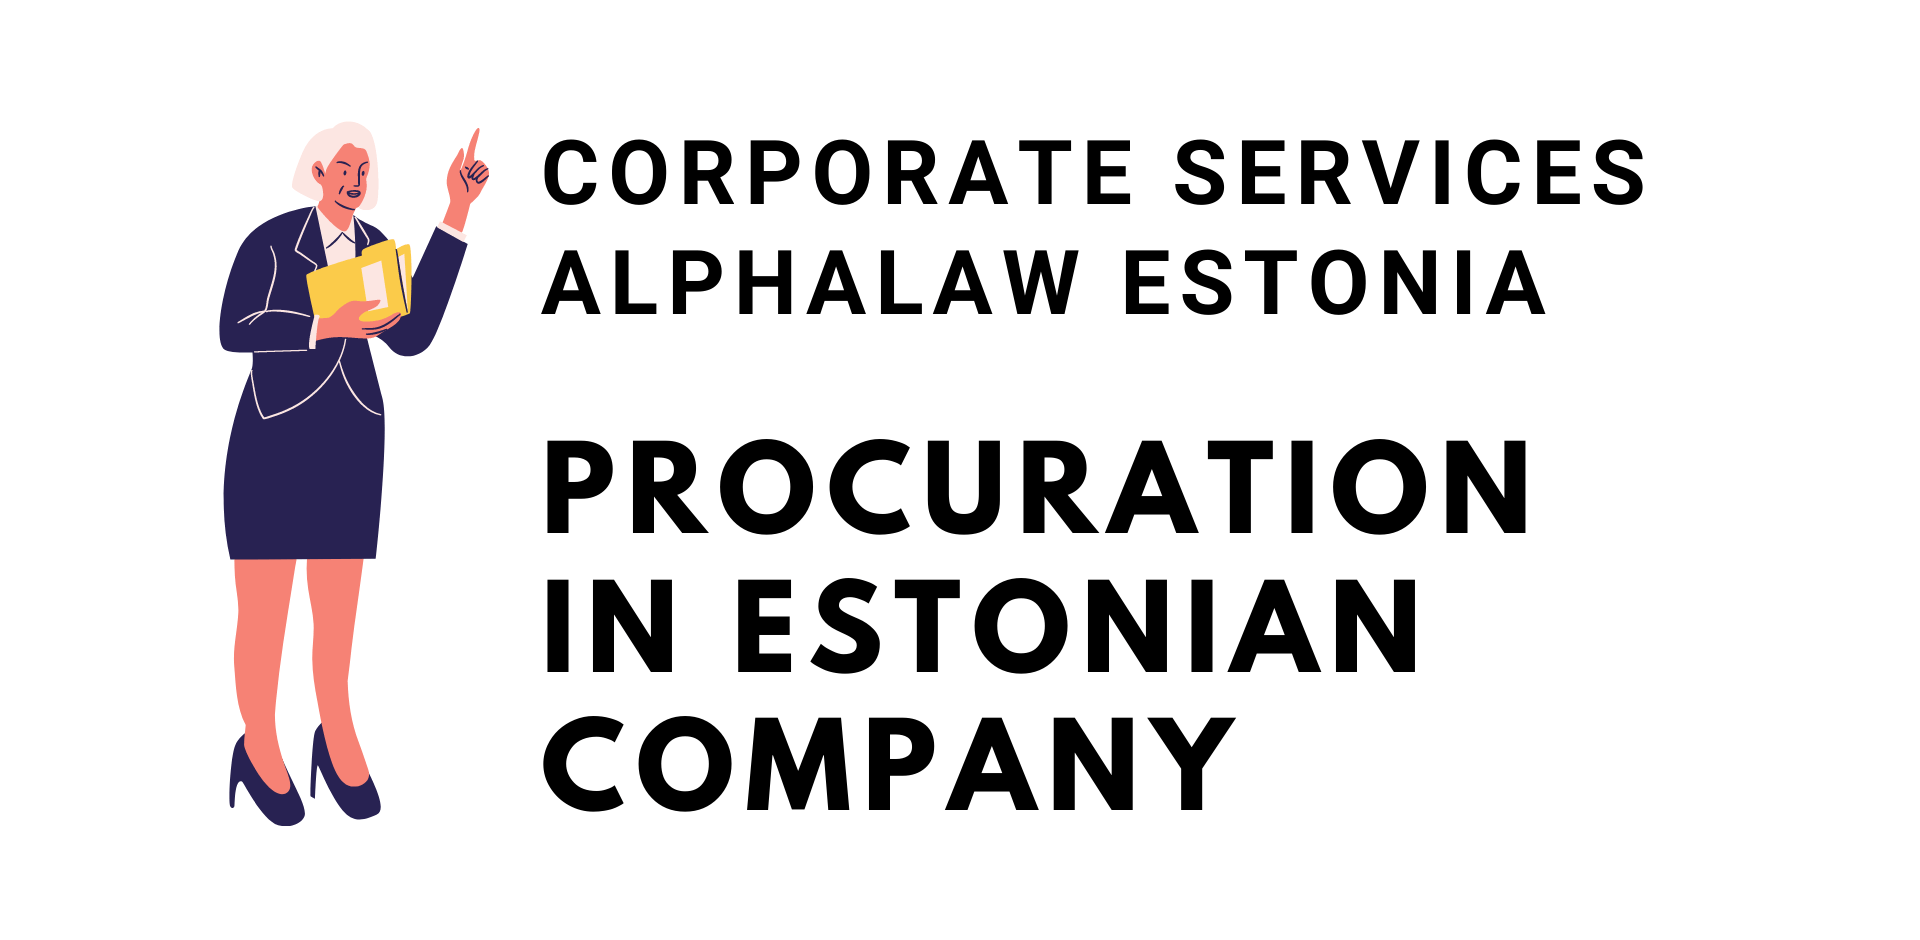 Procuration in Estonian Company and What is a Procuration?